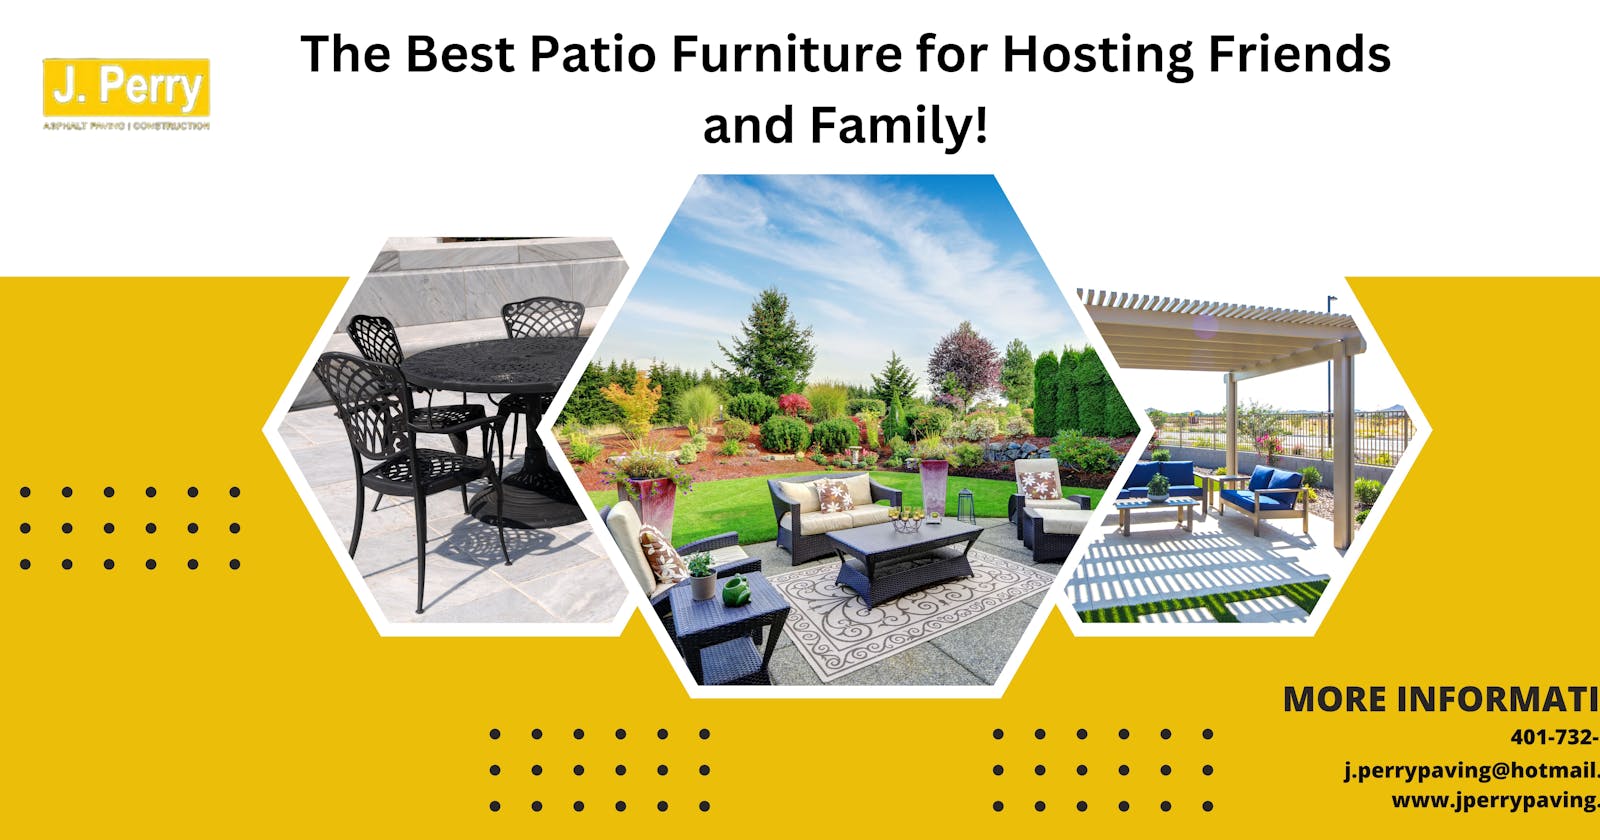 Outdoor Entertaining 101: The Best Patio Furniture for Hosting Friends and Family!